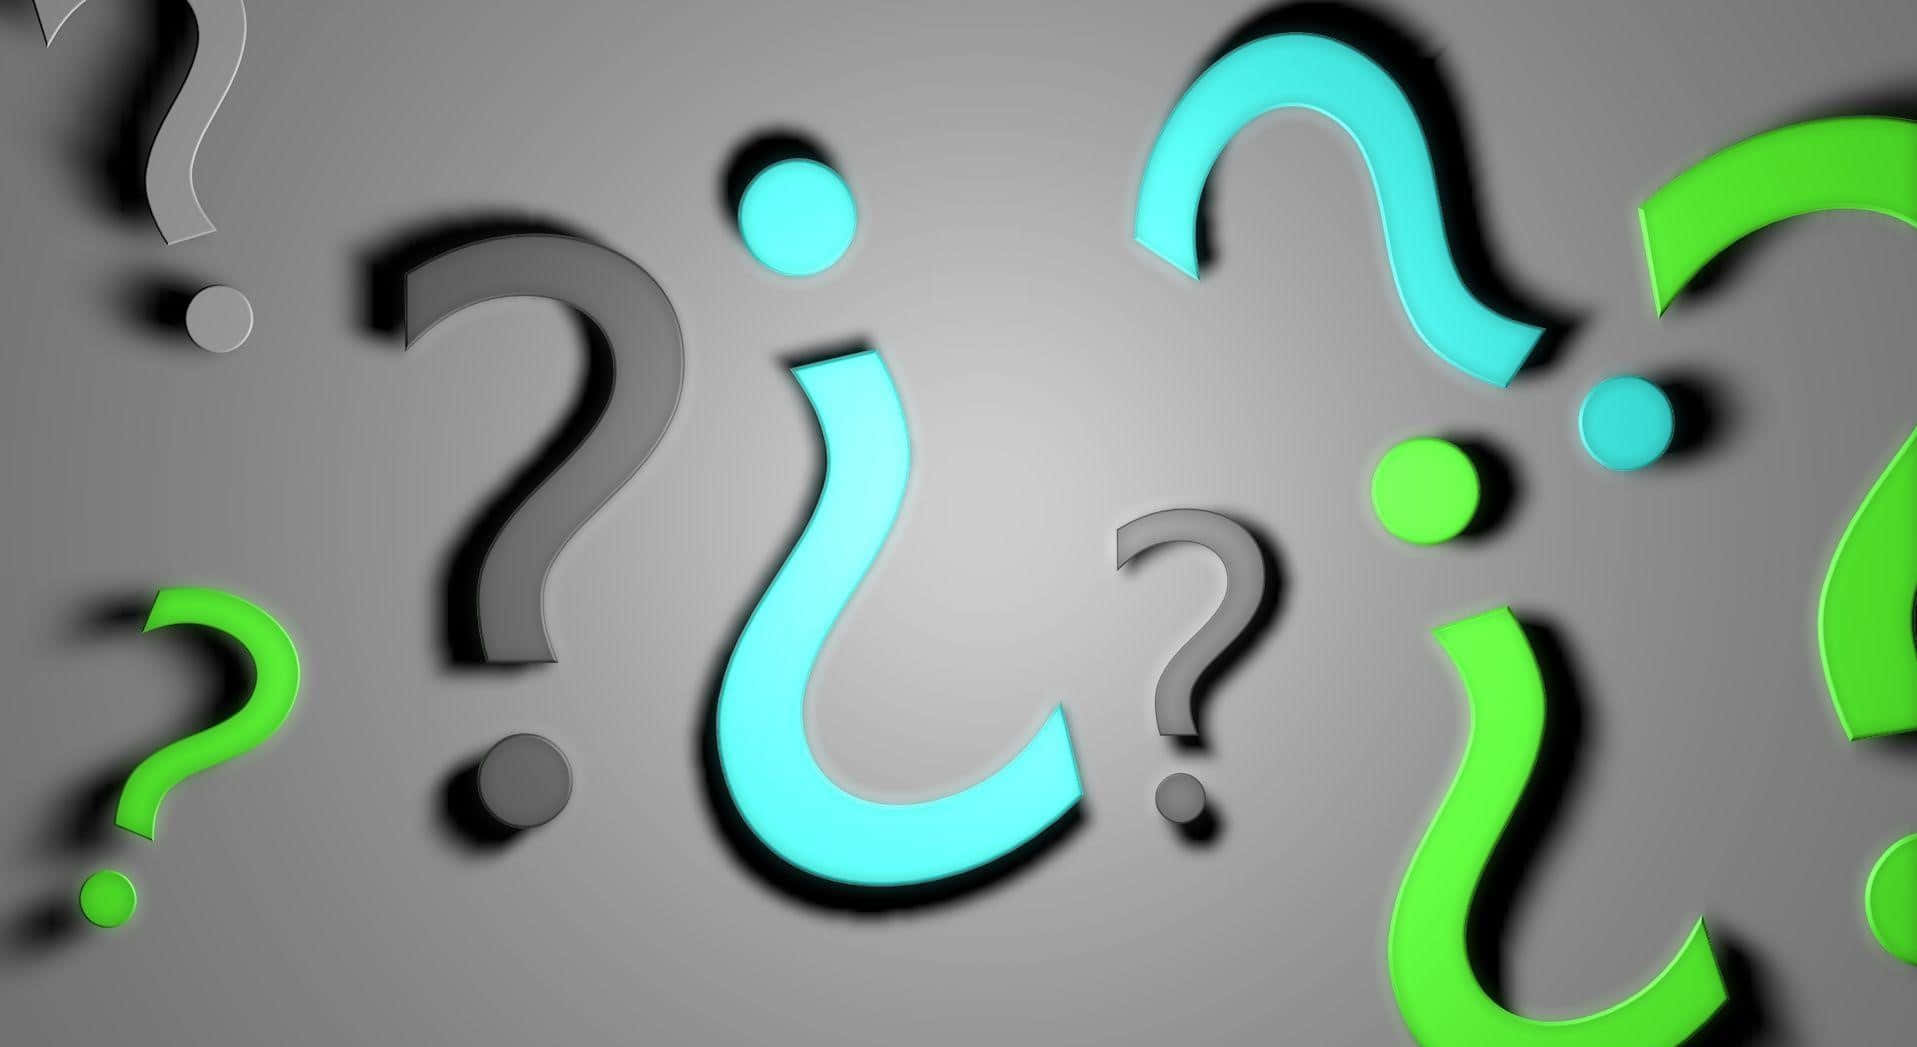 A dynamic and captivating question mark image